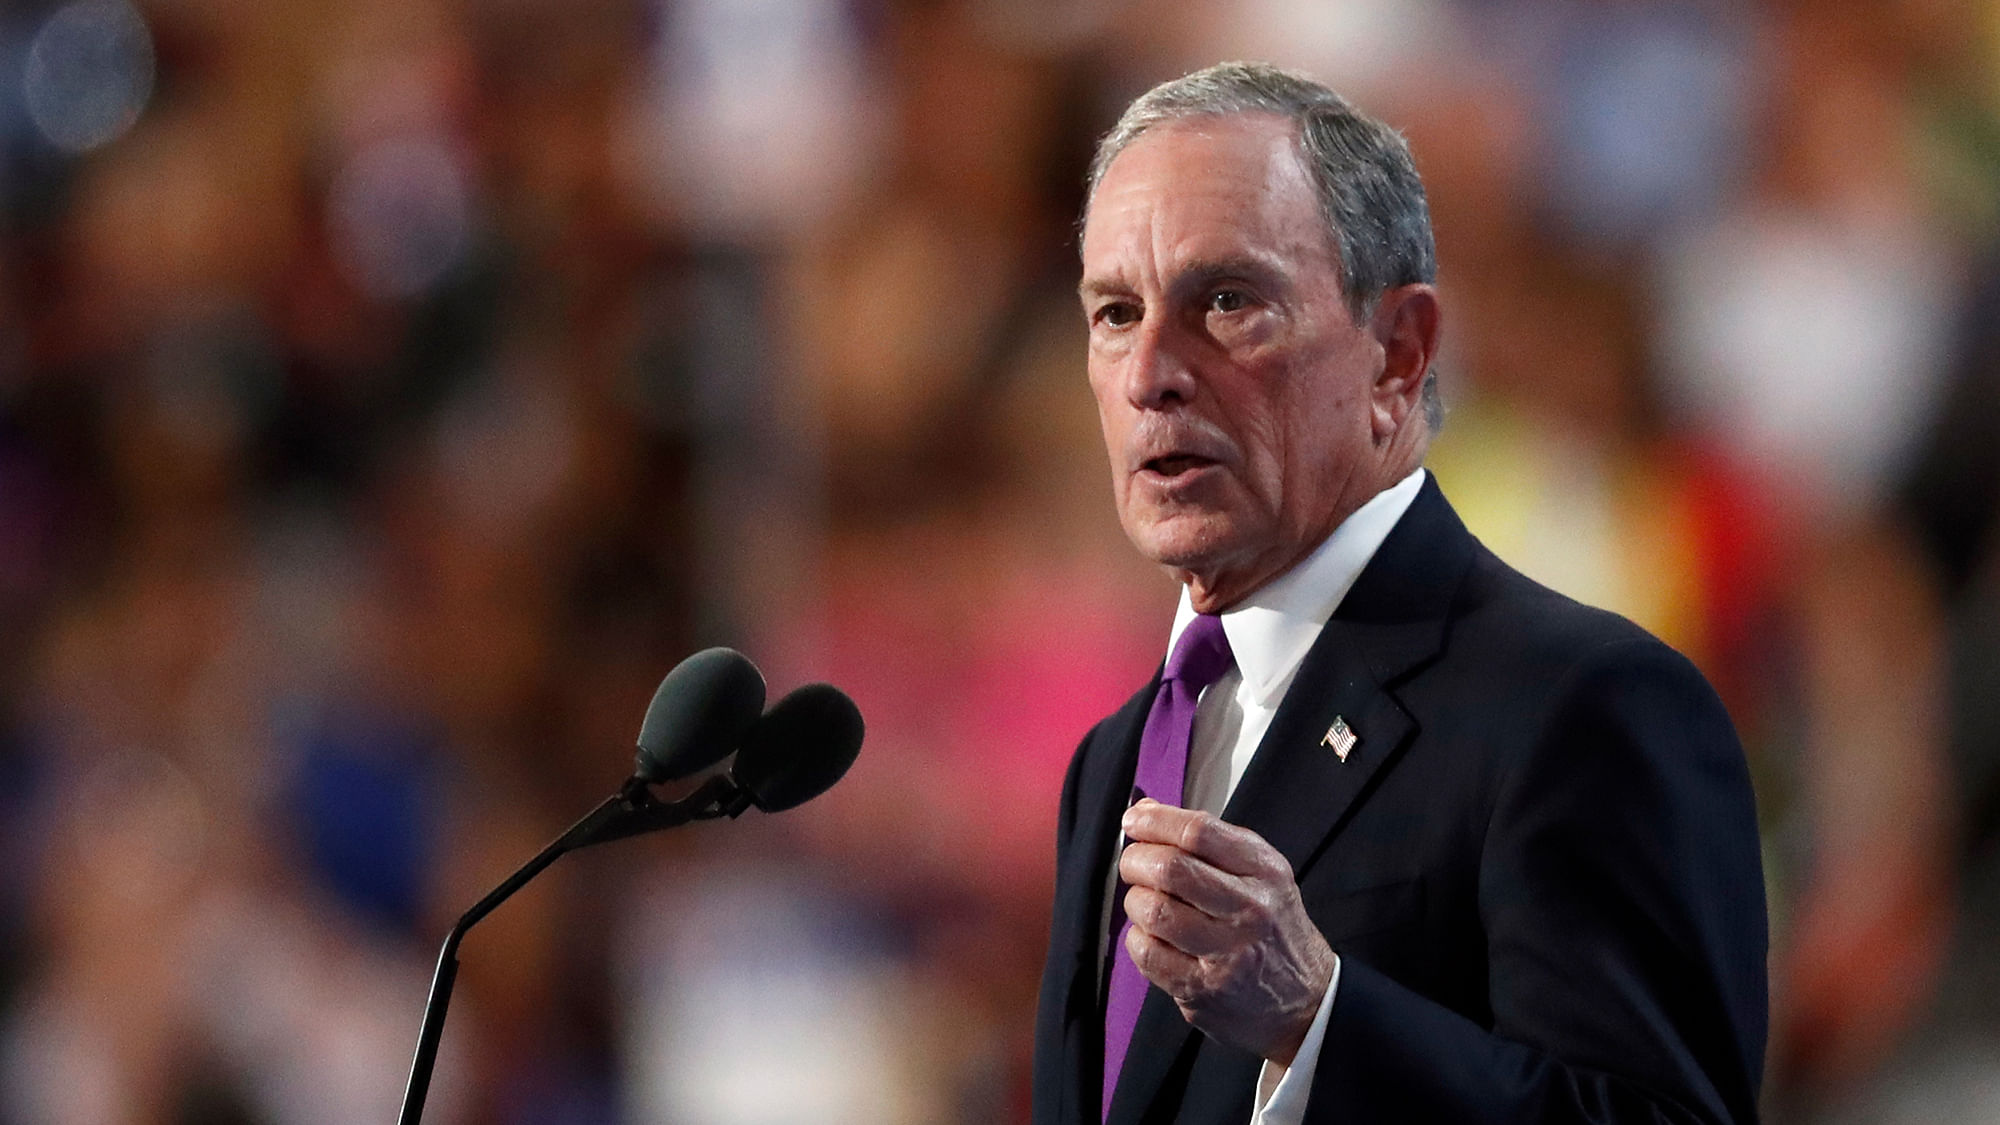 Former New York Mayor Michael Bloomberg speaks during the third day of the Democratic National Convention in Philadelphia on Wednesday. (Photo: AP)